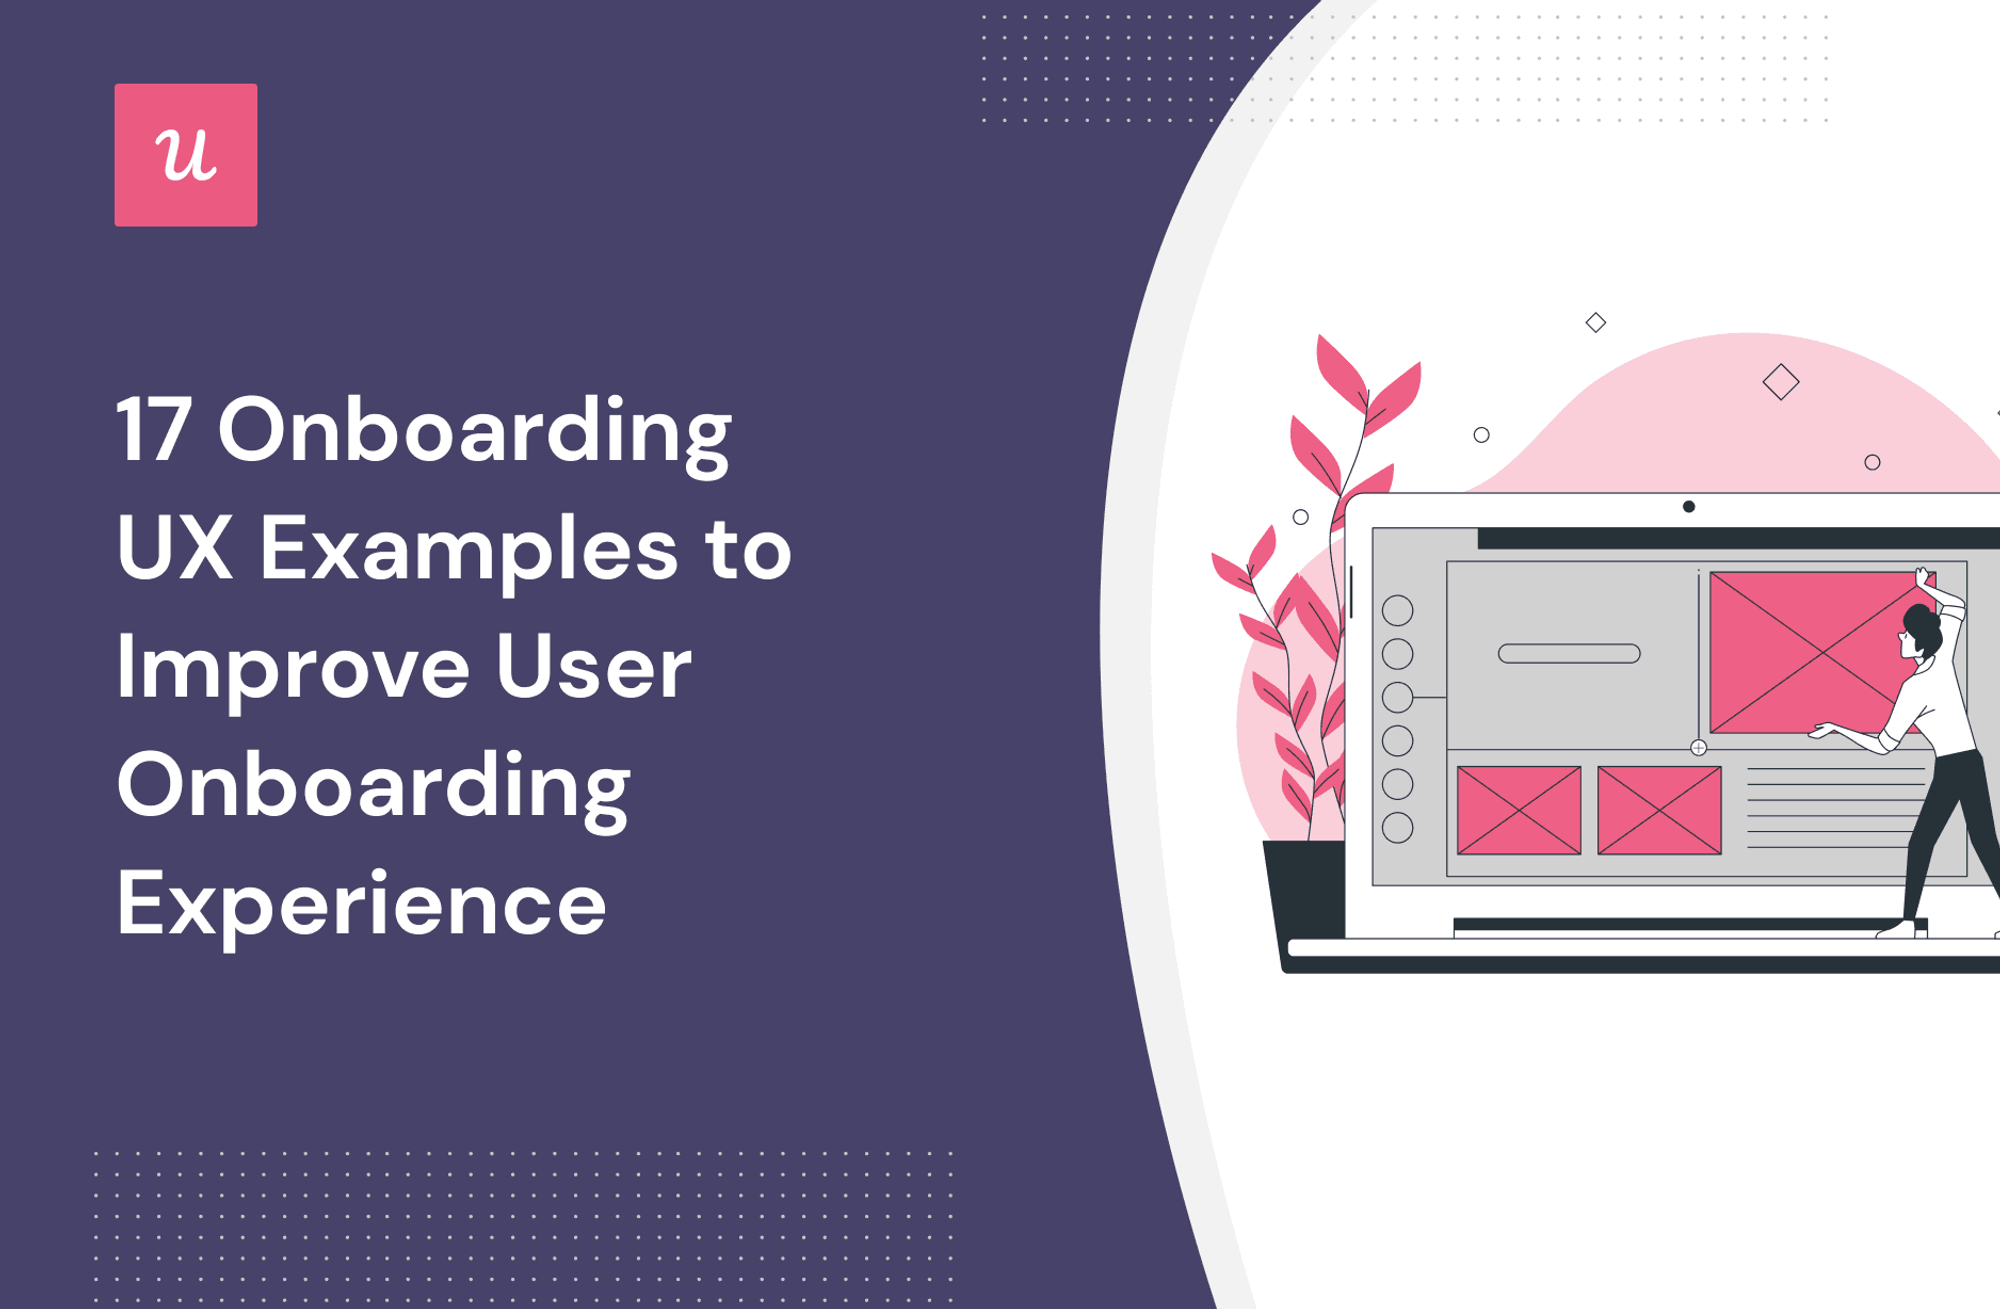 17 Onboarding UX Examples to Improve User Onboarding Experience